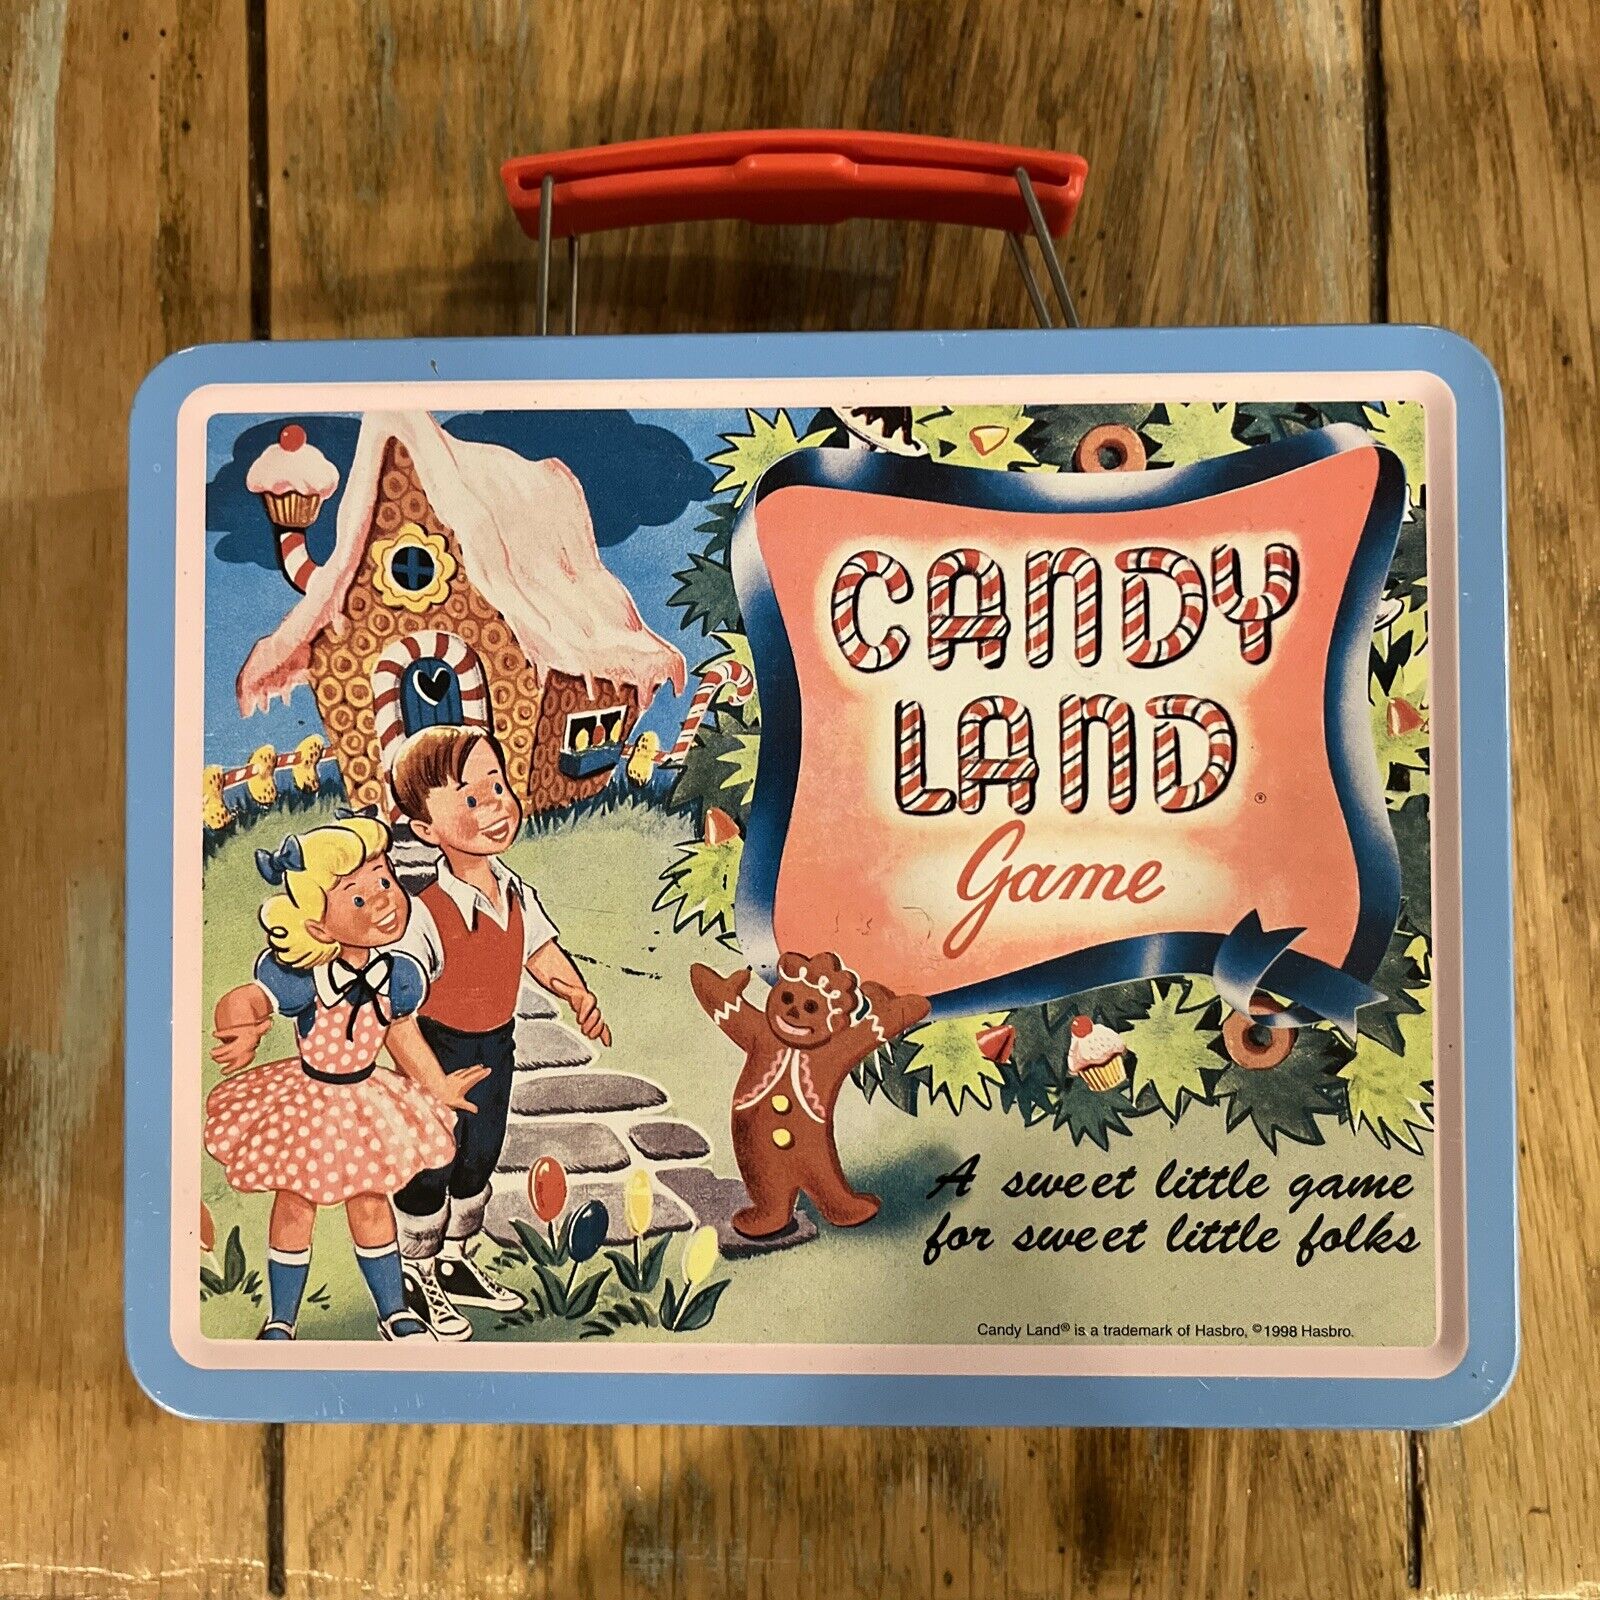 Vintage (1998) Hasbro “Candy Land Game” Metal Lunch Box